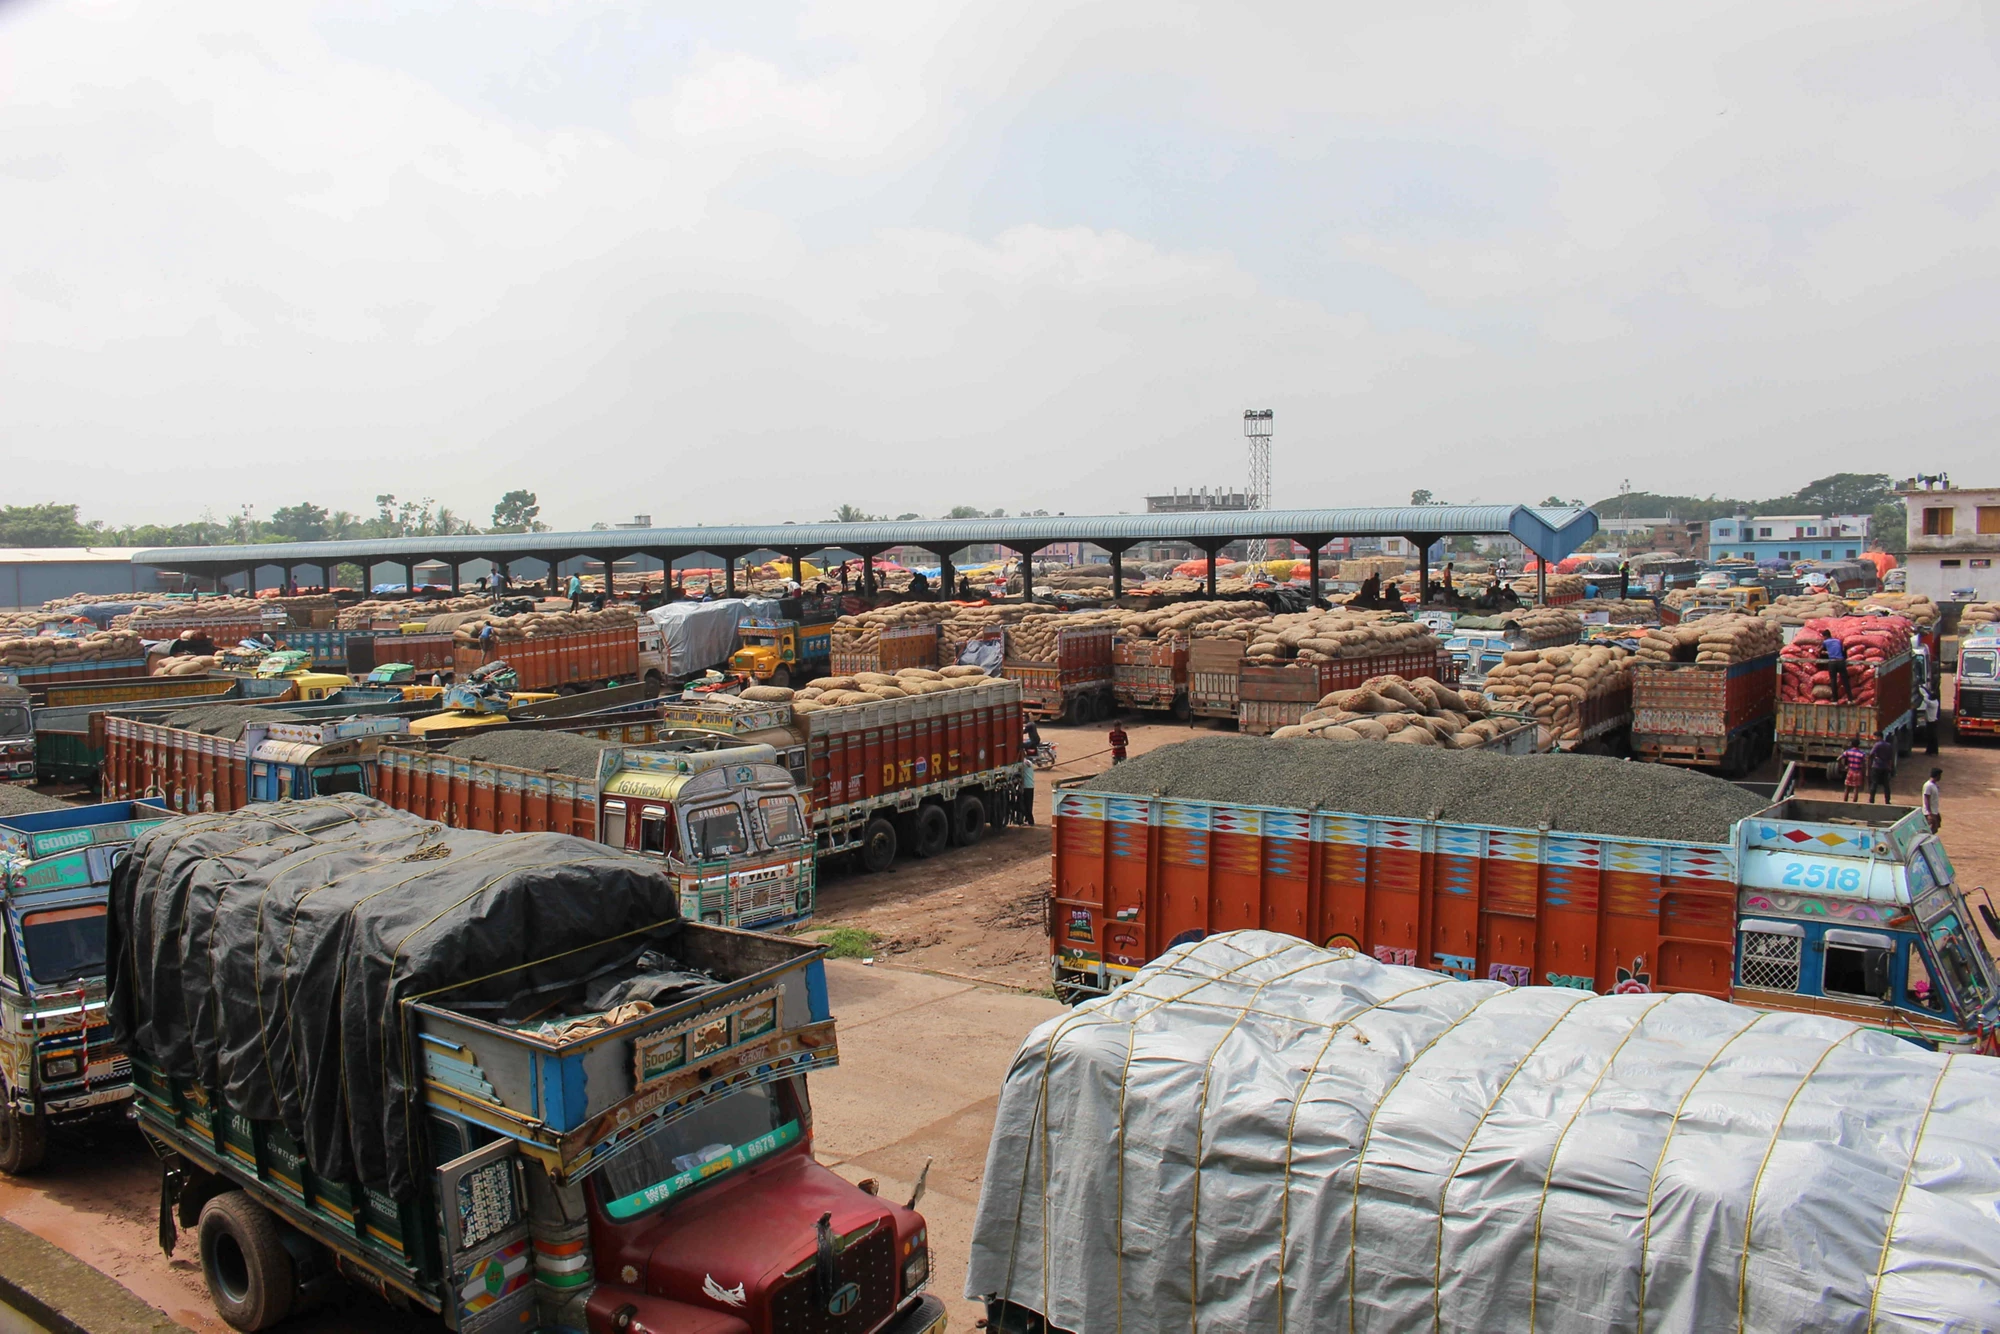 Cutting red tape, together with the digitization and automation of customs procedures, can reduce the long delays at the borders in the Bangladesh, Bhutan, India, and Nepal (BBIN) sub-region. Photo of Bhomra land port between Bangladesh and India by Erik Nora.